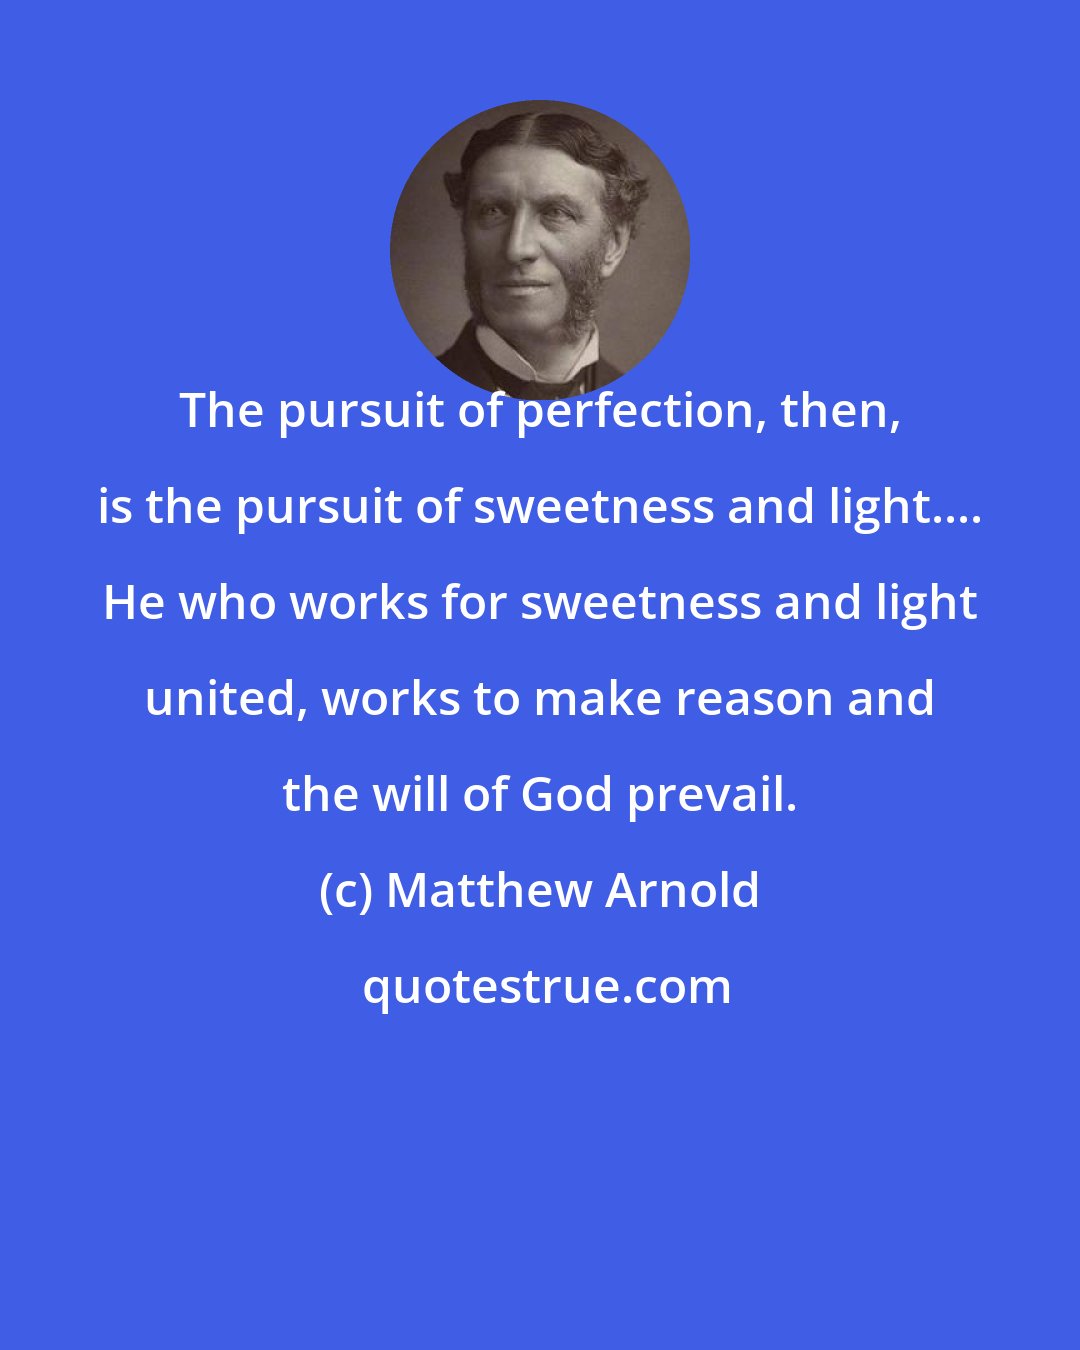 Matthew Arnold: The pursuit of perfection, then, is the pursuit of sweetness and light.... He who works for sweetness and light united, works to make reason and the will of God prevail.